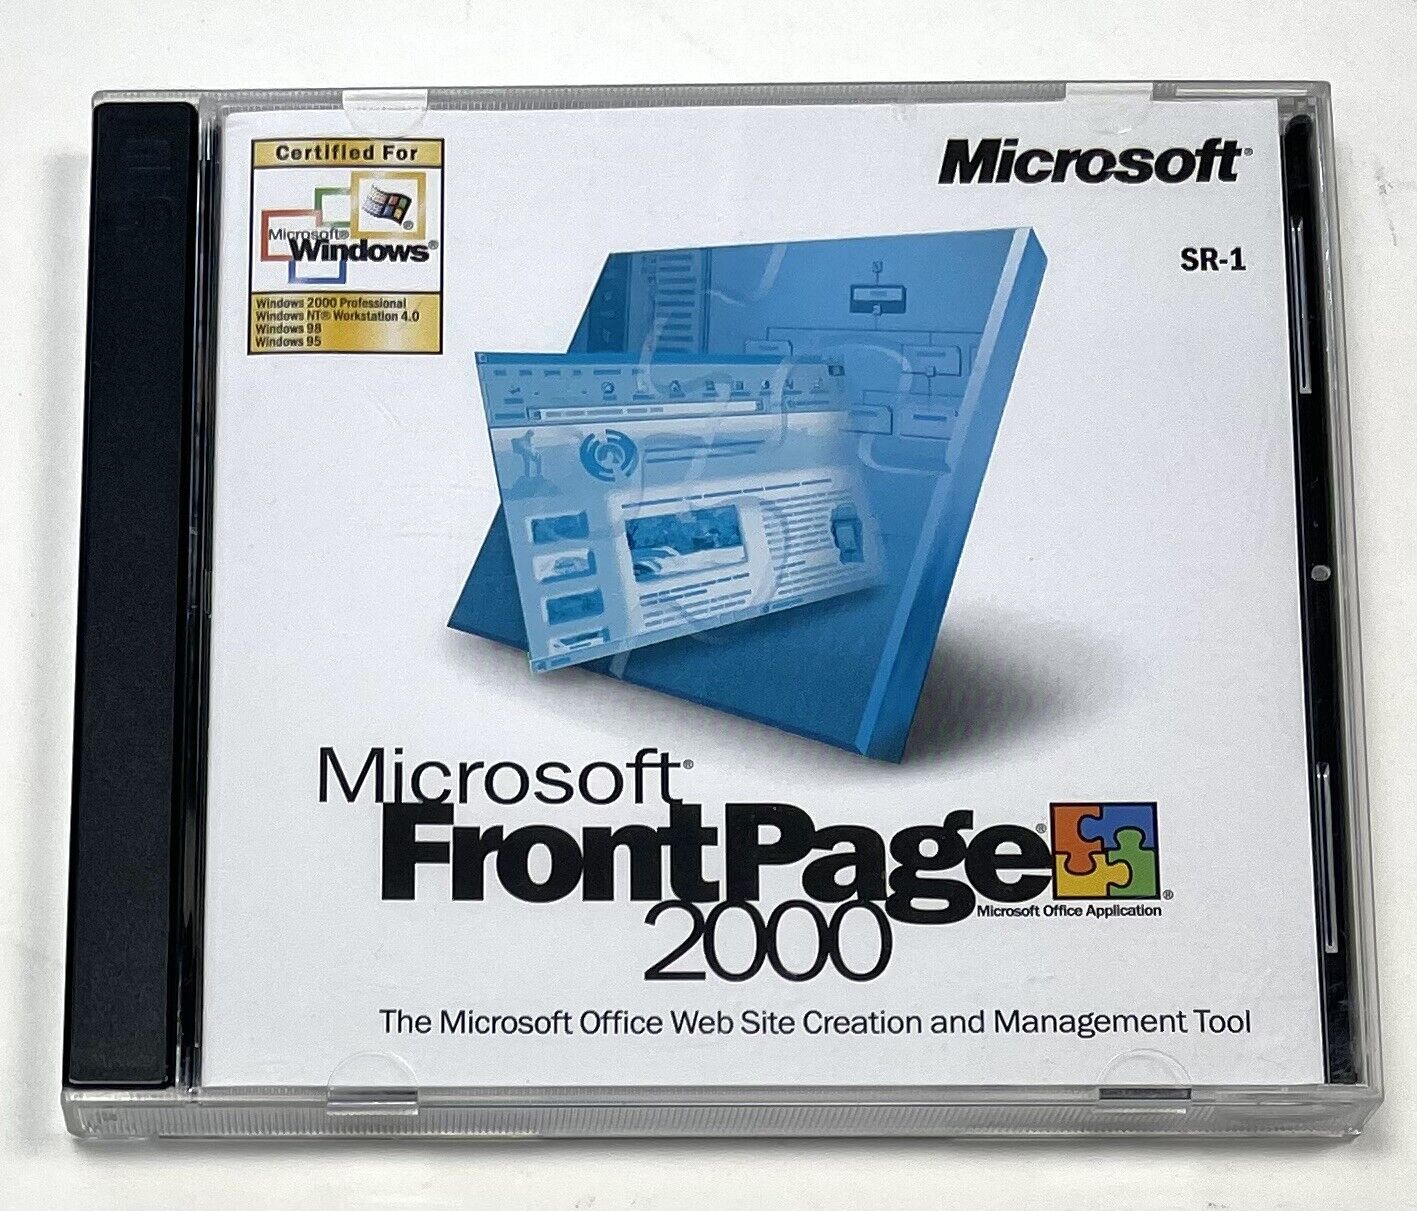 2000 Microsoft Front Page CD-Rom Software Full Version SR-1 w/ Product Key EUC